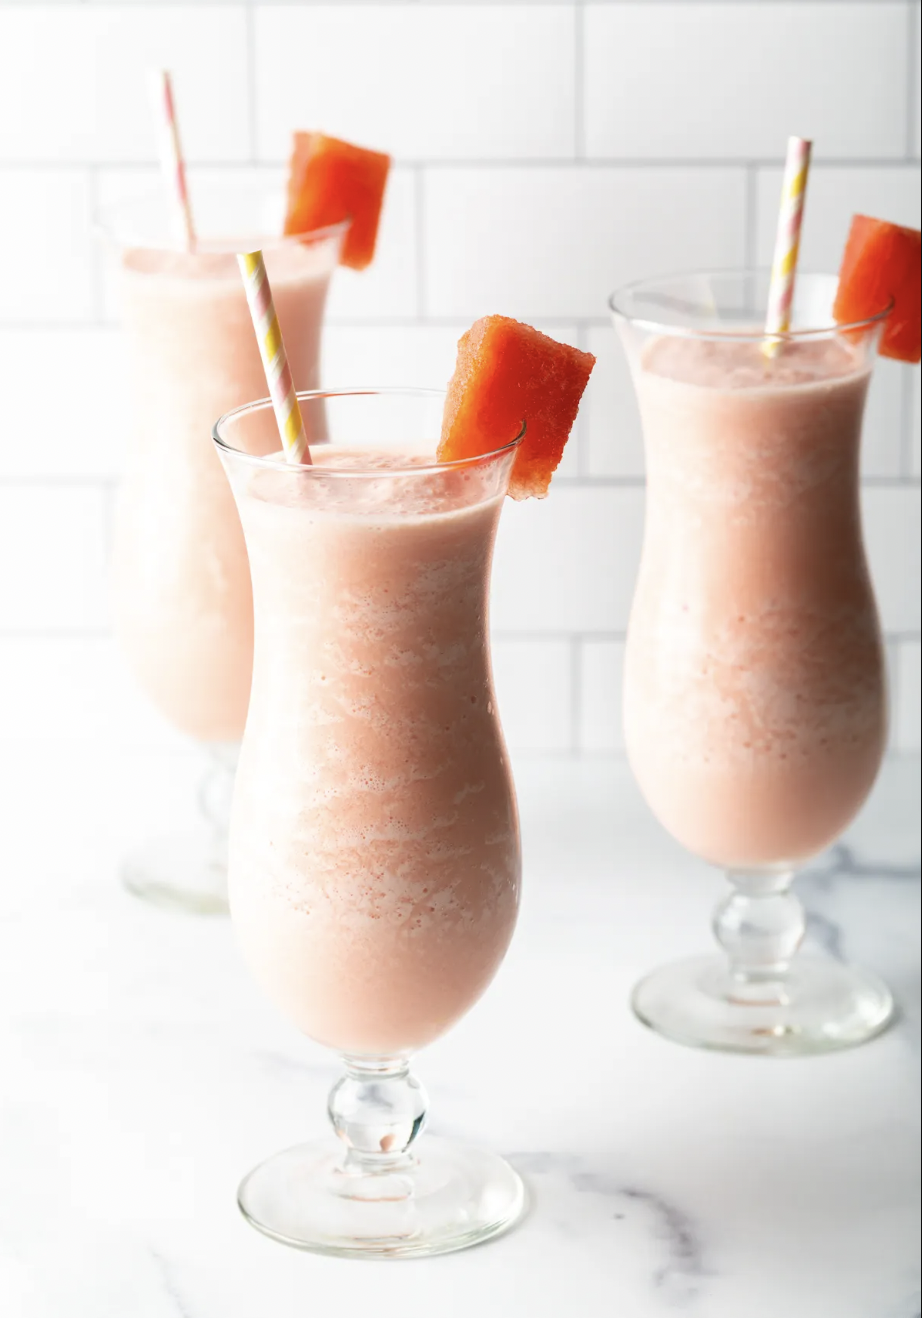 On the lighter side, this watermelon and yogurt smoothie is refreshing and filling and just takes 5 minutes. (via <a href="https://www.aspicyperspective.com/easiest-healthy-watermelon-smoothie/"><strong>A Spicy Perspective</strong></a>)